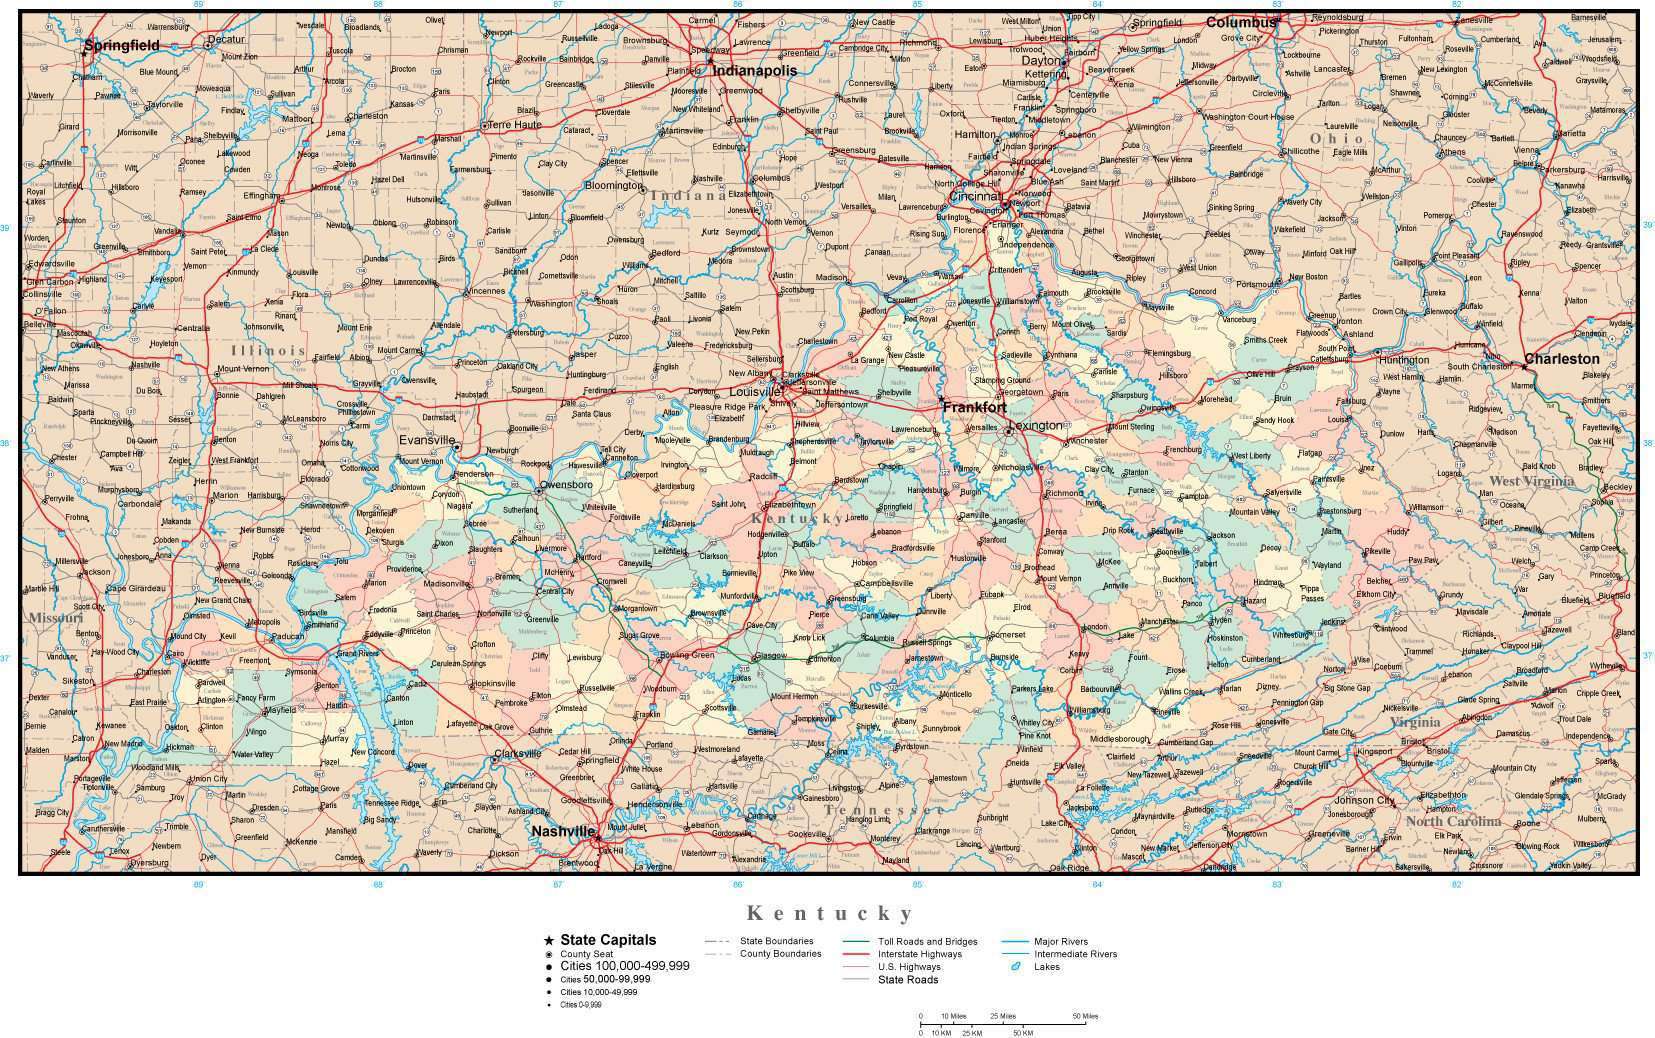 Kentucky Adobe Illustrator Map With Counties Cities County Seats Major Roads 3589